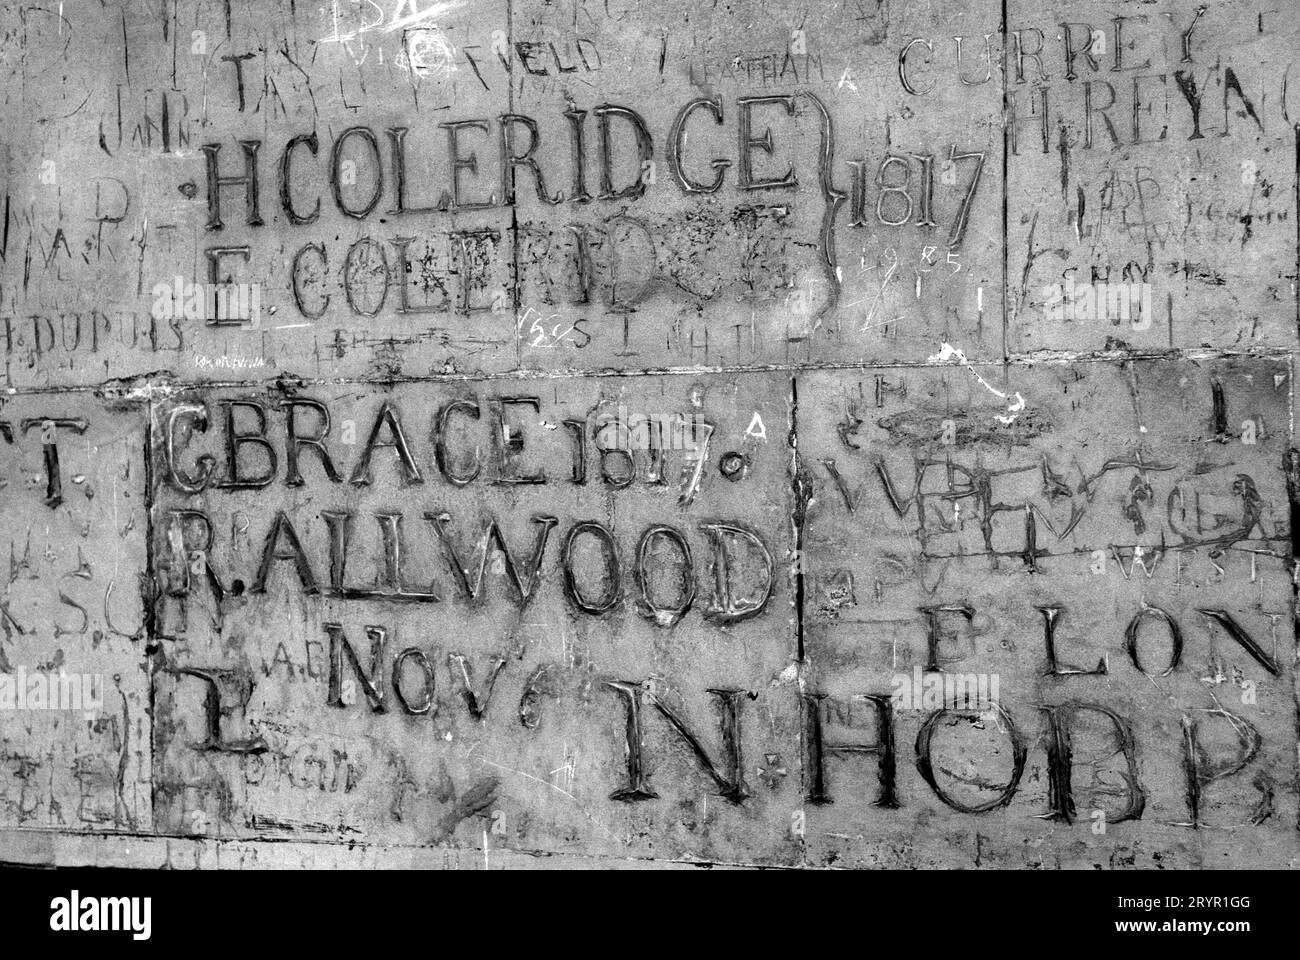 H Coleridge E Coleridge and other boys surnames, past pupils of Eton College - Old Etonians -  OE's carved on a stone wall of the Cloisters at Eton School. Windsor England 2000s 2006  UK HOMER SYKES Stock Photo